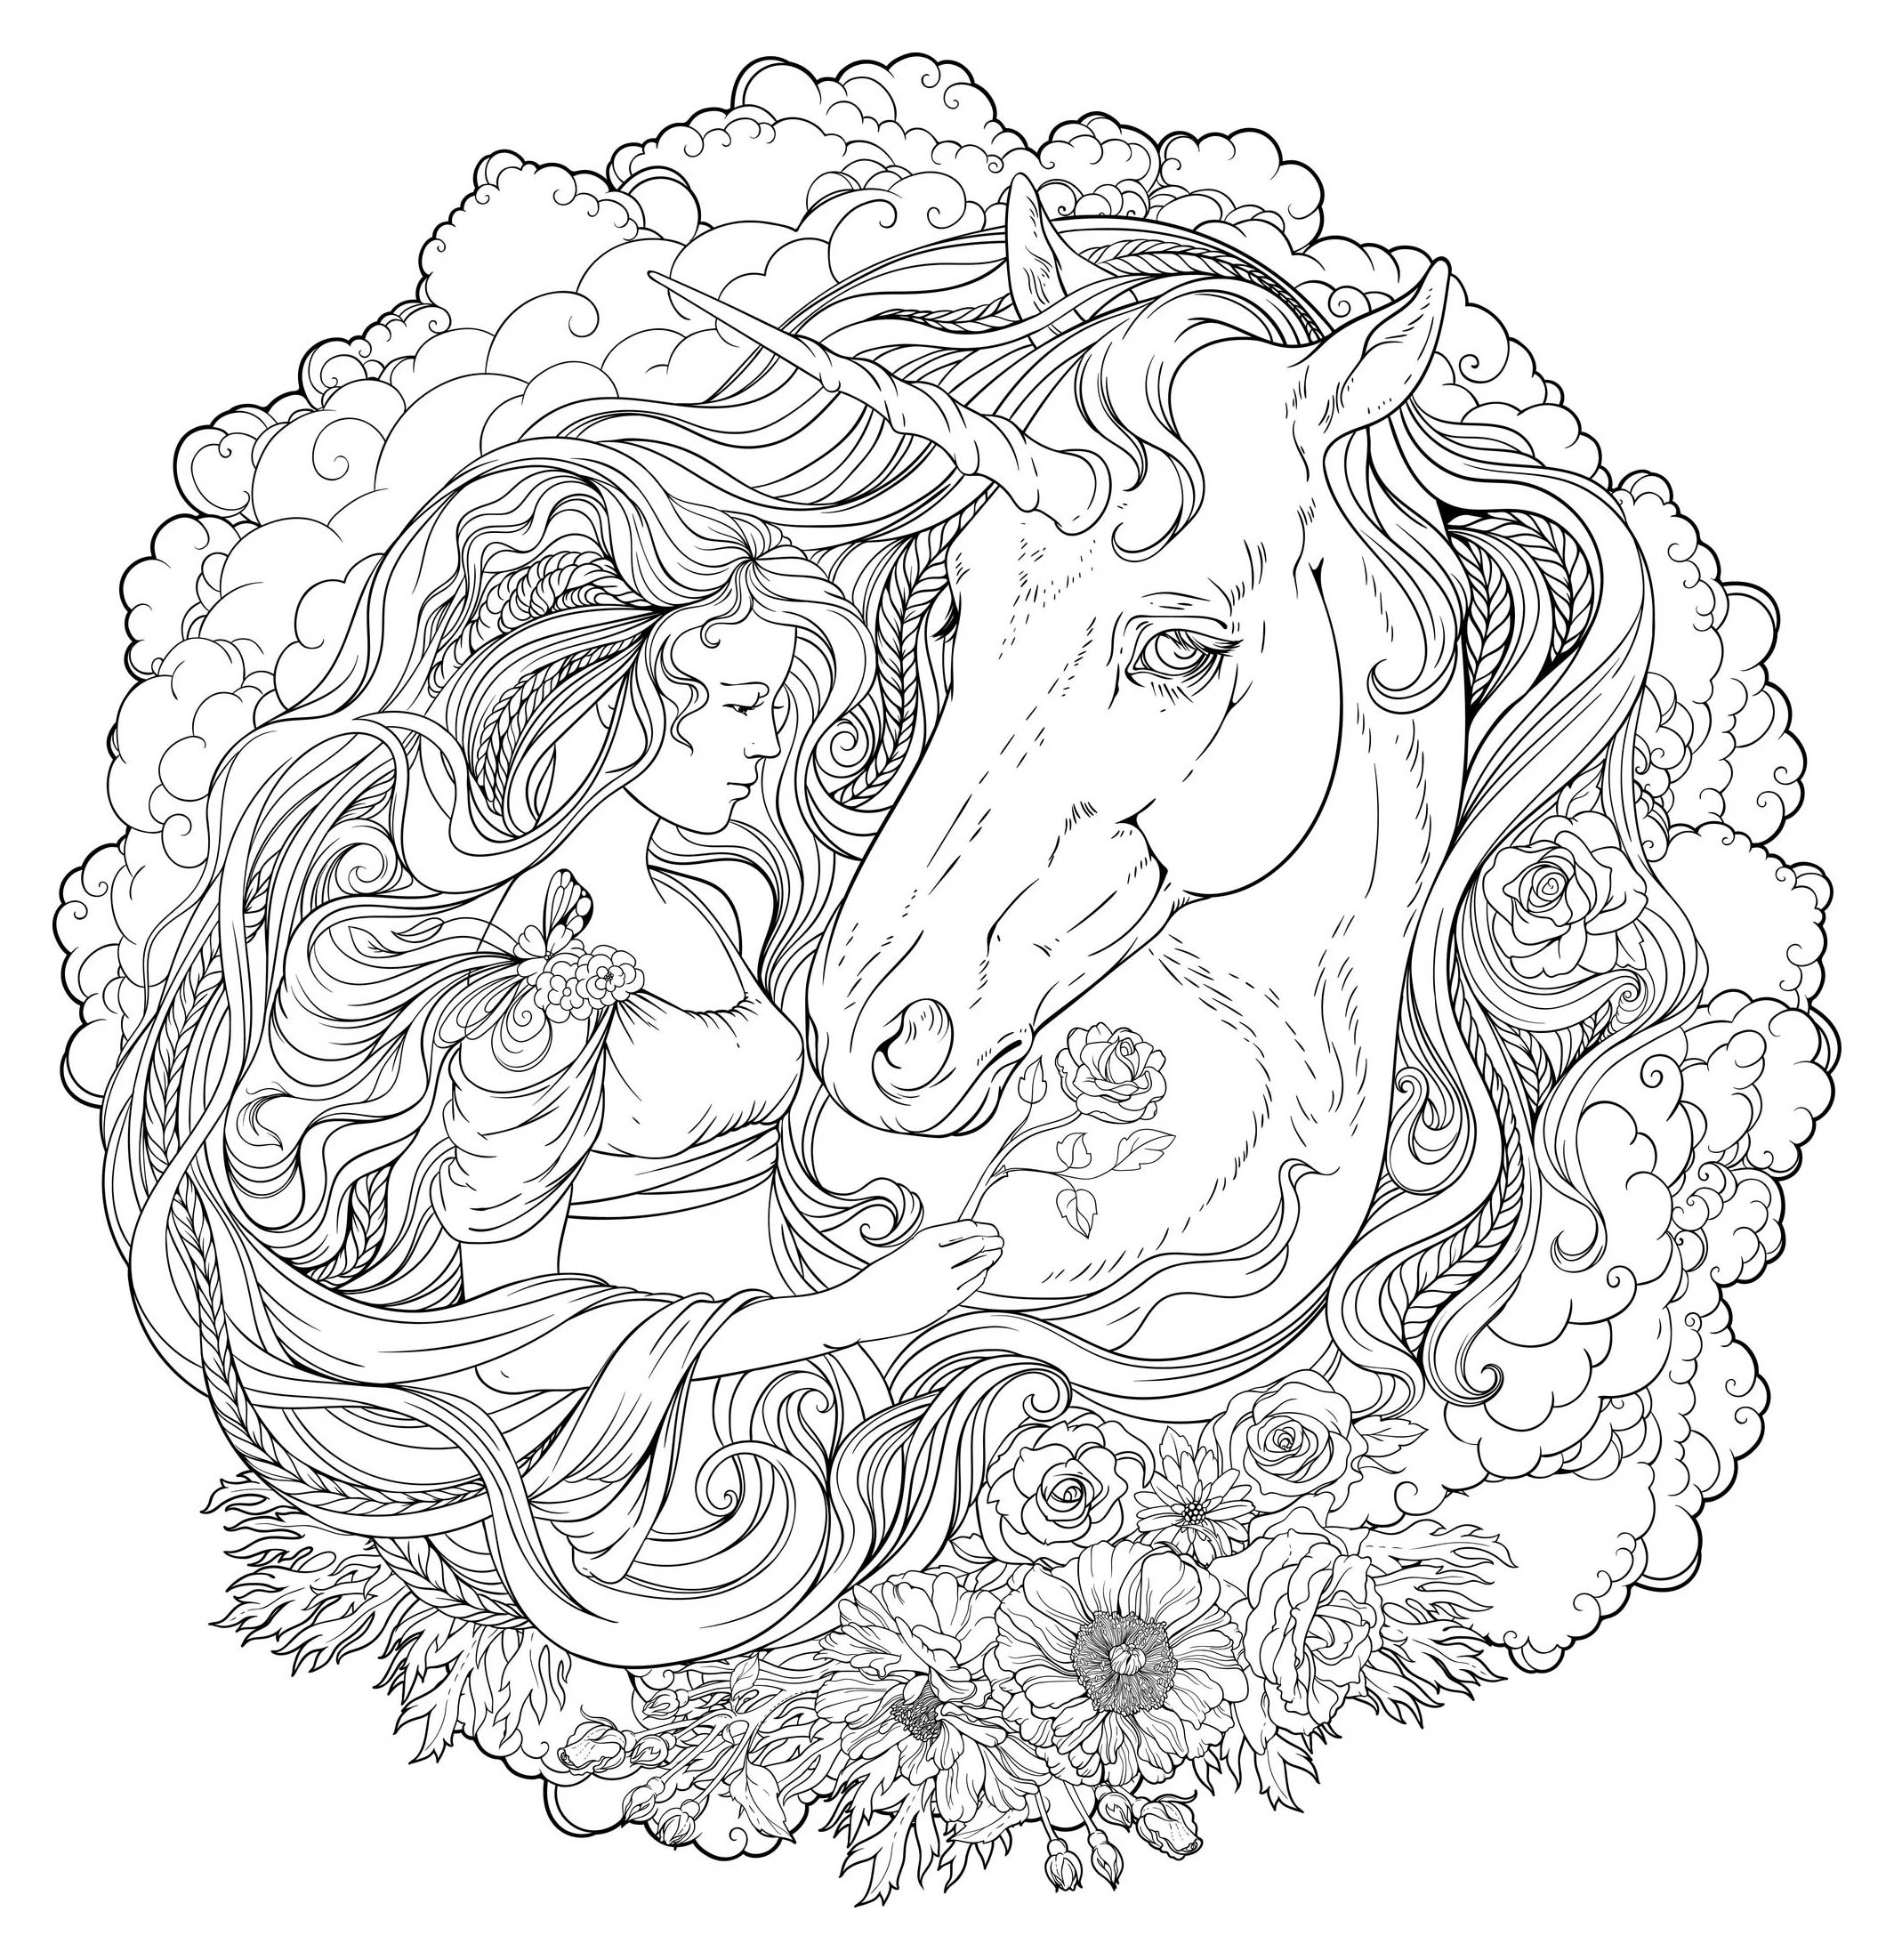 Unicorn and girl in the clouds - Mandalas with Characters ...